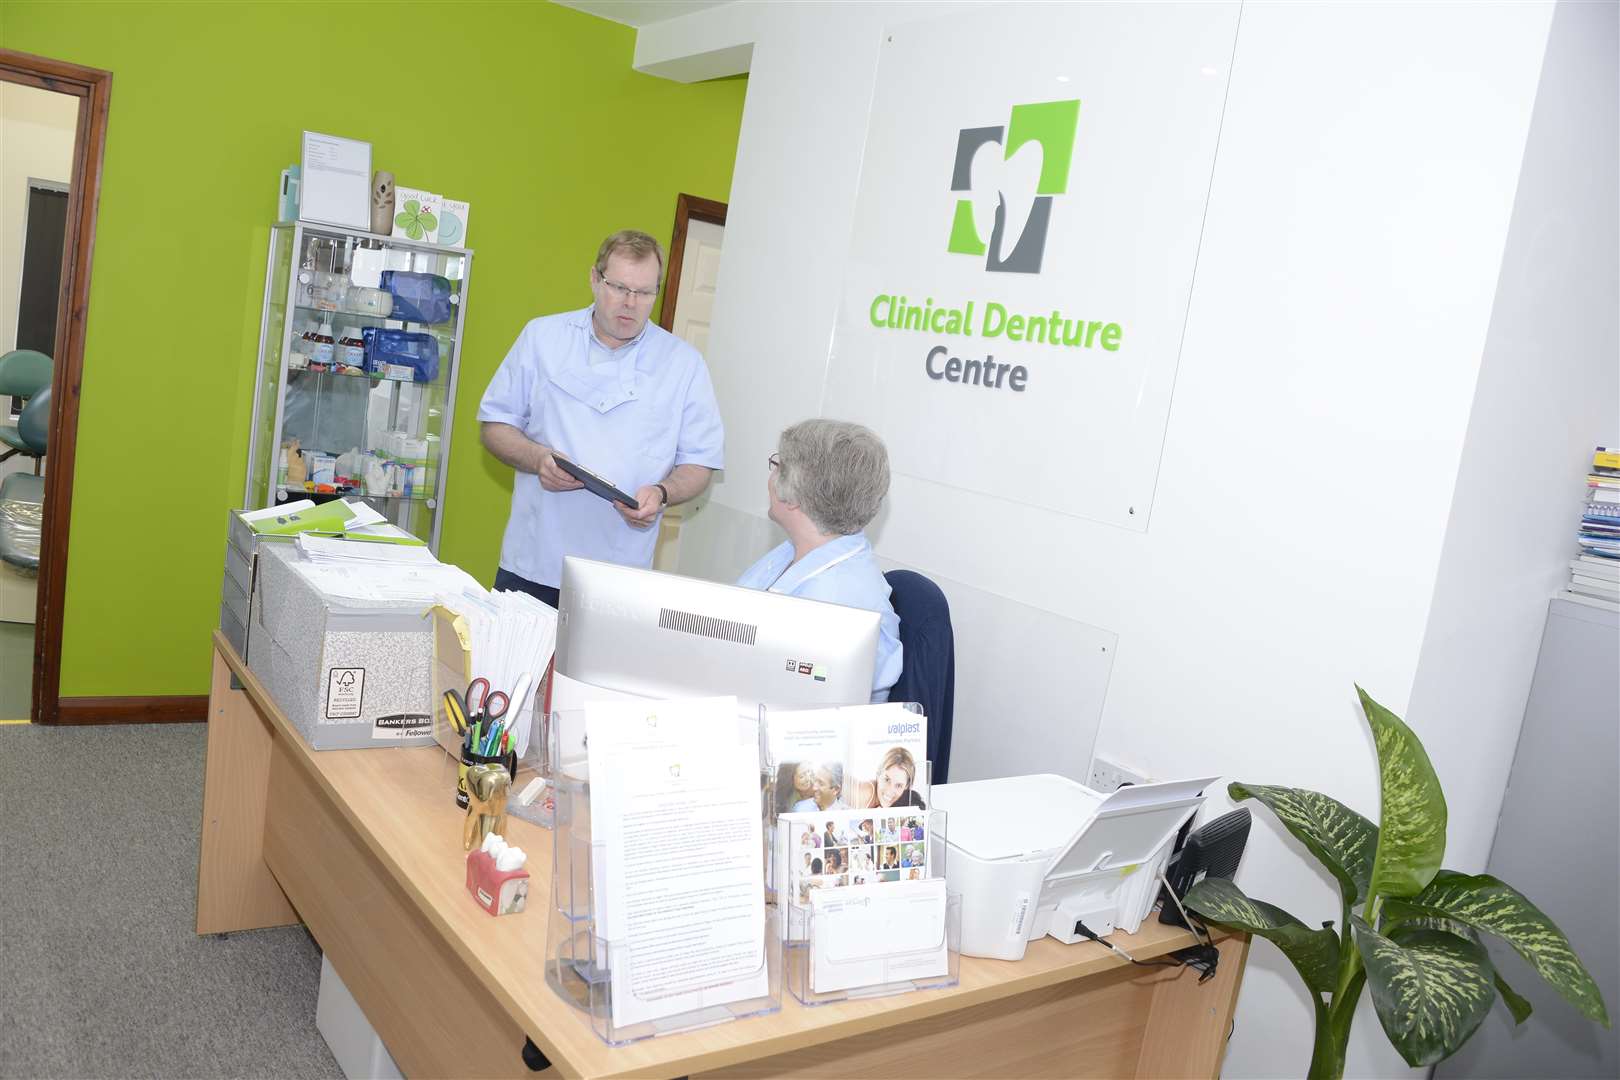 Clinical Denture Centre in Deal